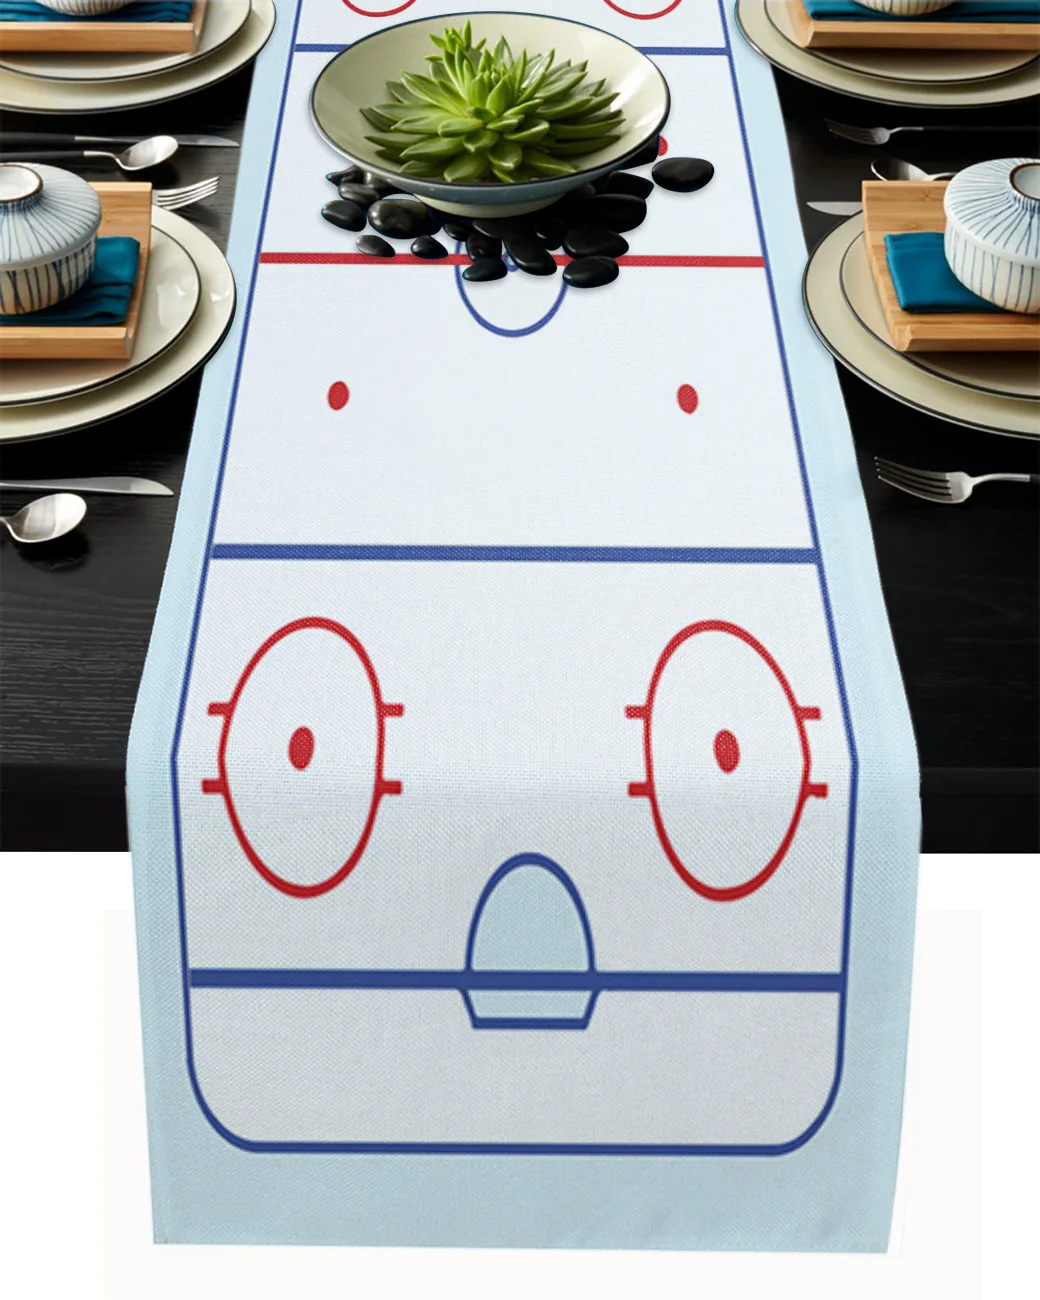 Ice Hockey Field Simple Table Runner Kitchen Decor Tablecloth Placemat Hotel Home Wedding Decor Table Runners